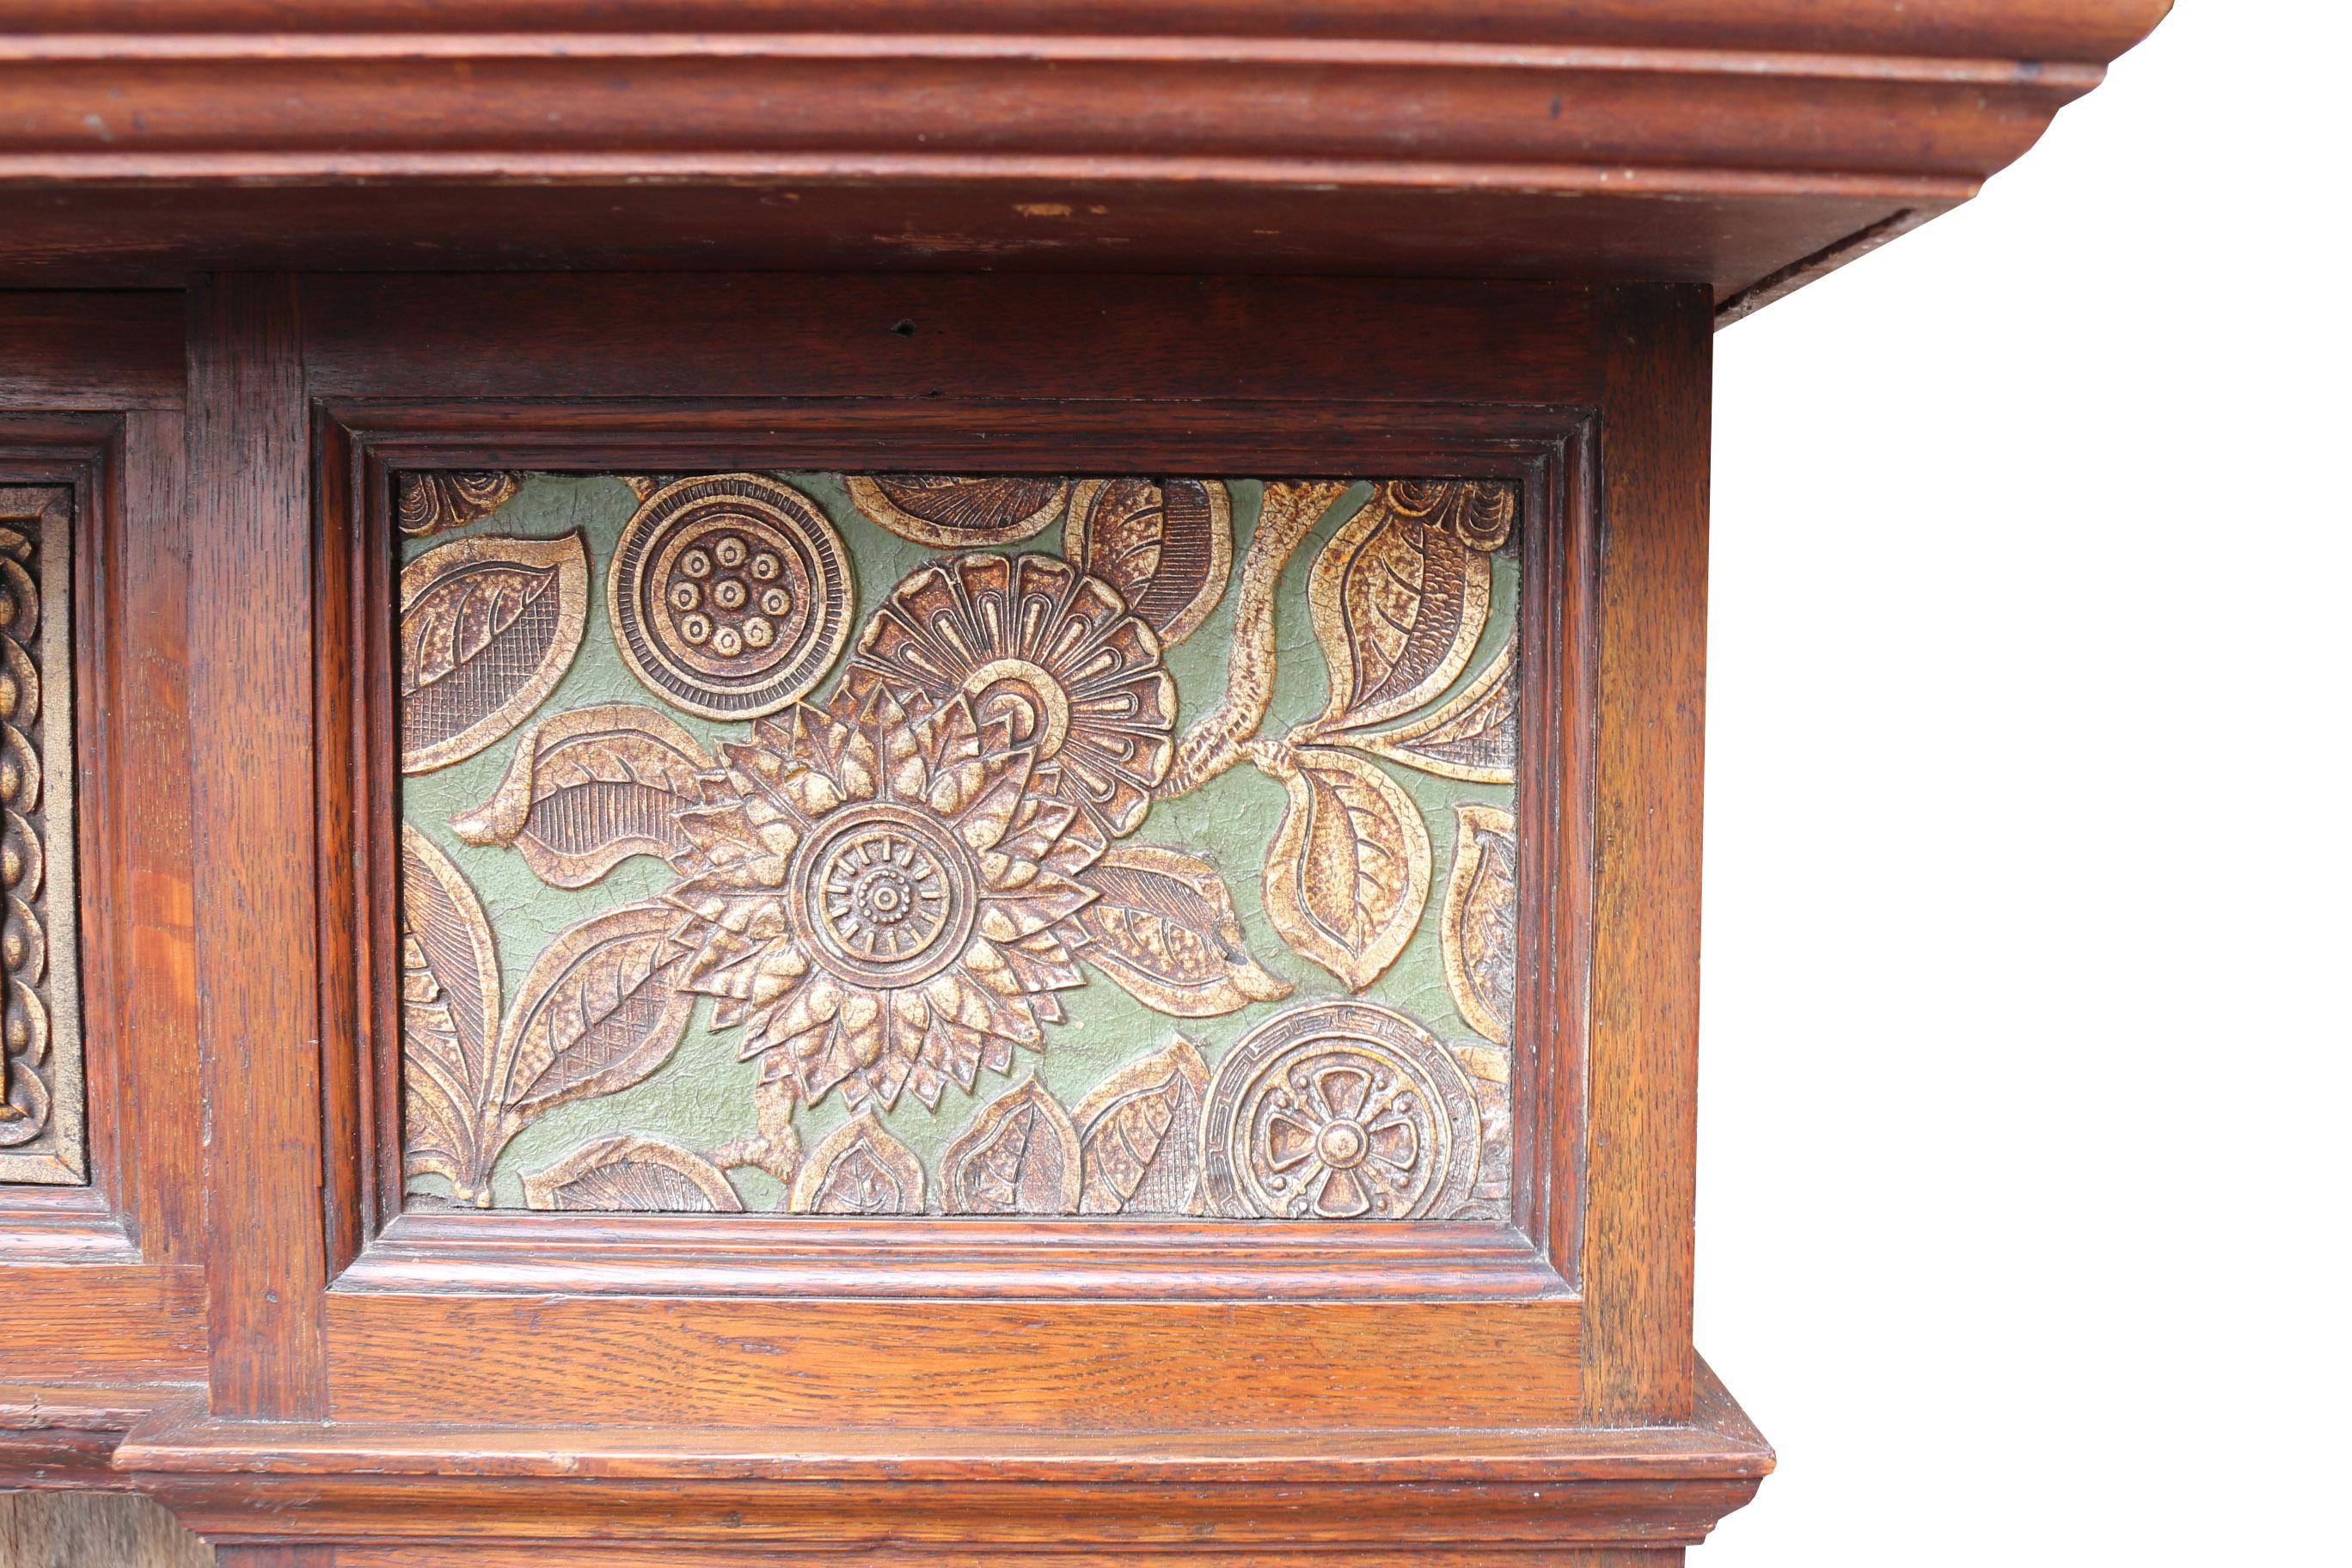 An original Arts & Crafts period oak fire surround with mirrored over mantle. The panels are a form of linoleum composite. Decorated in a green and gold scheme.

Measures: Height 220 cm
Width 166 cm
Depth 29 cm
Opening height 104 cm
Opening